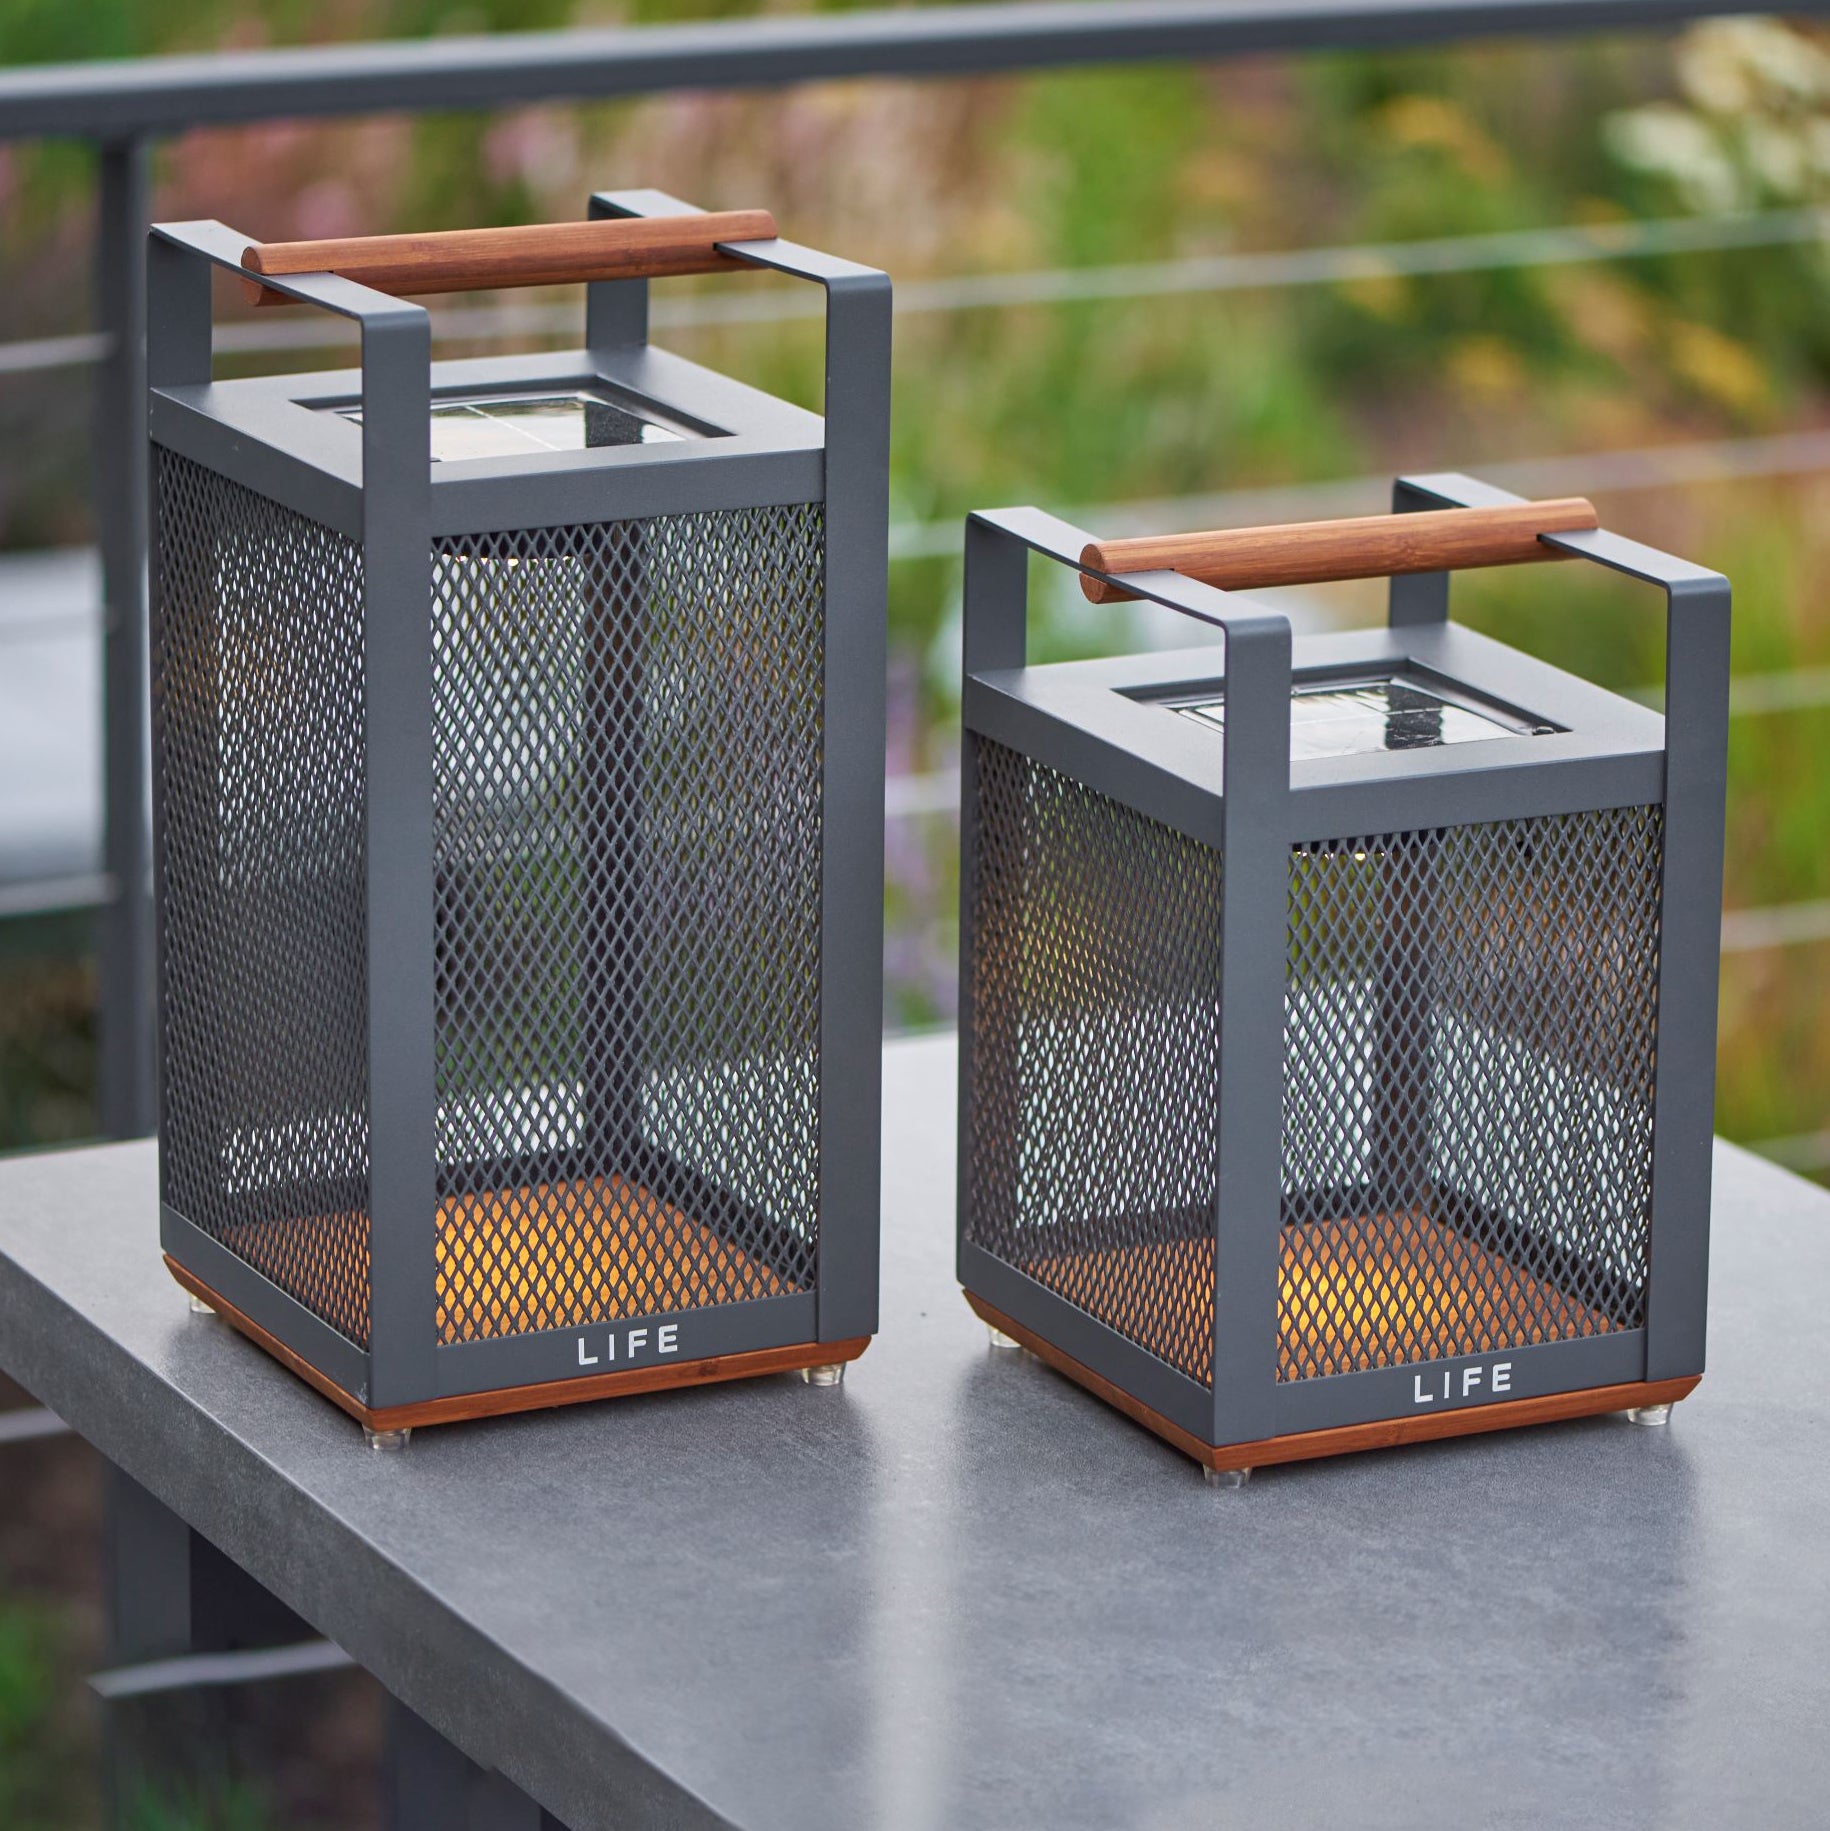 Patio accessories to compliment any style. Shine solar lanterns from Life Outdoor Living